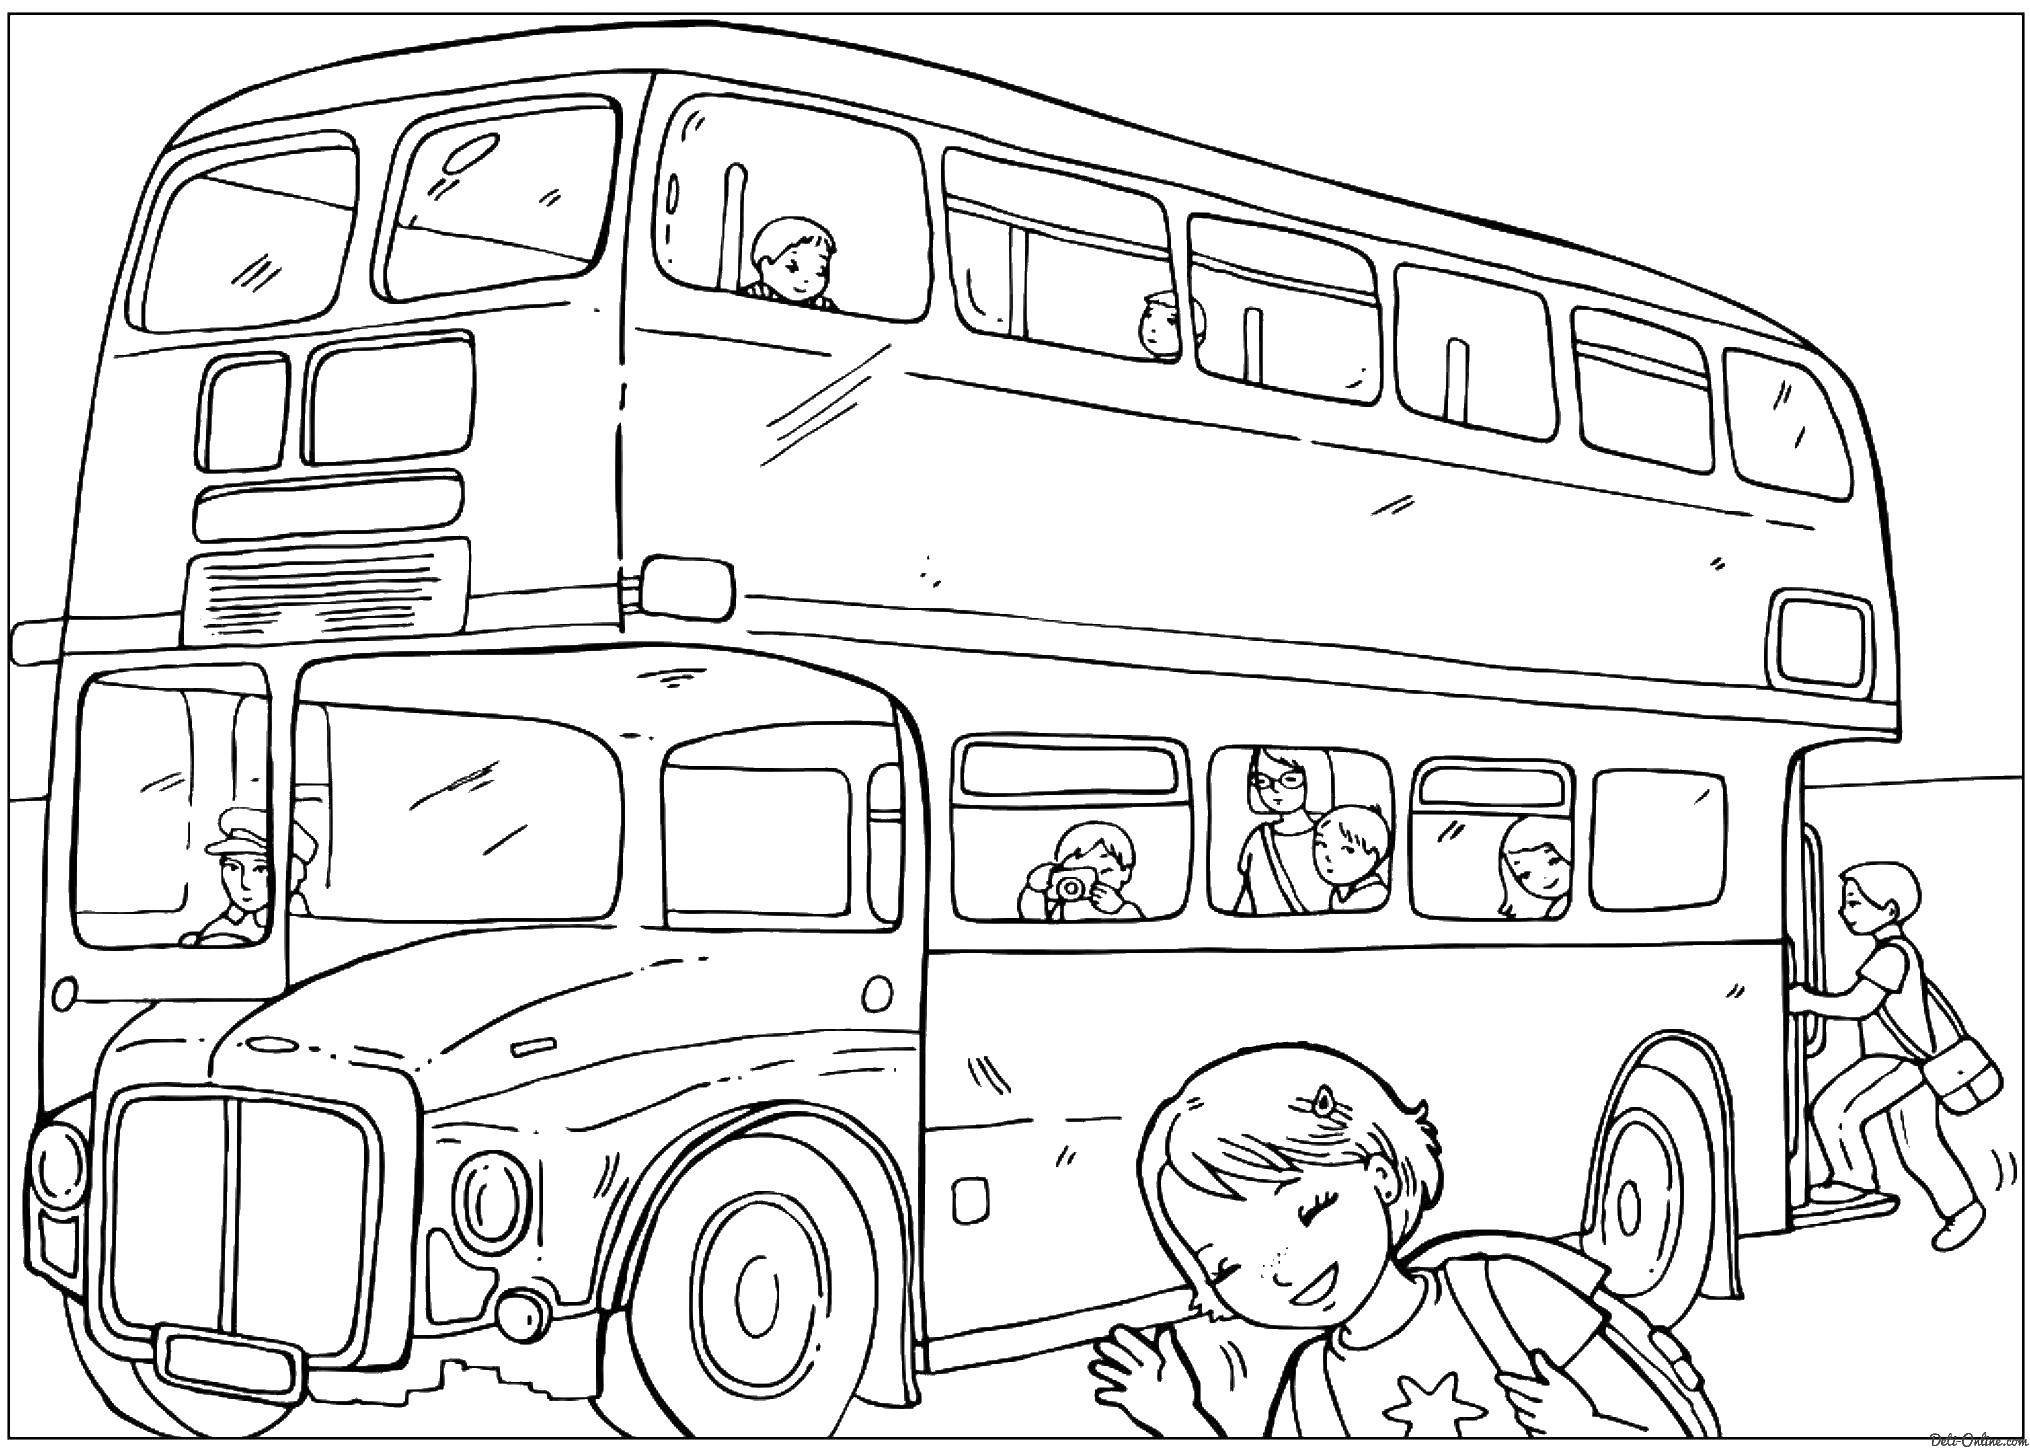 Coloring Children sit in the bus. Category England. Tags:  bus, school.